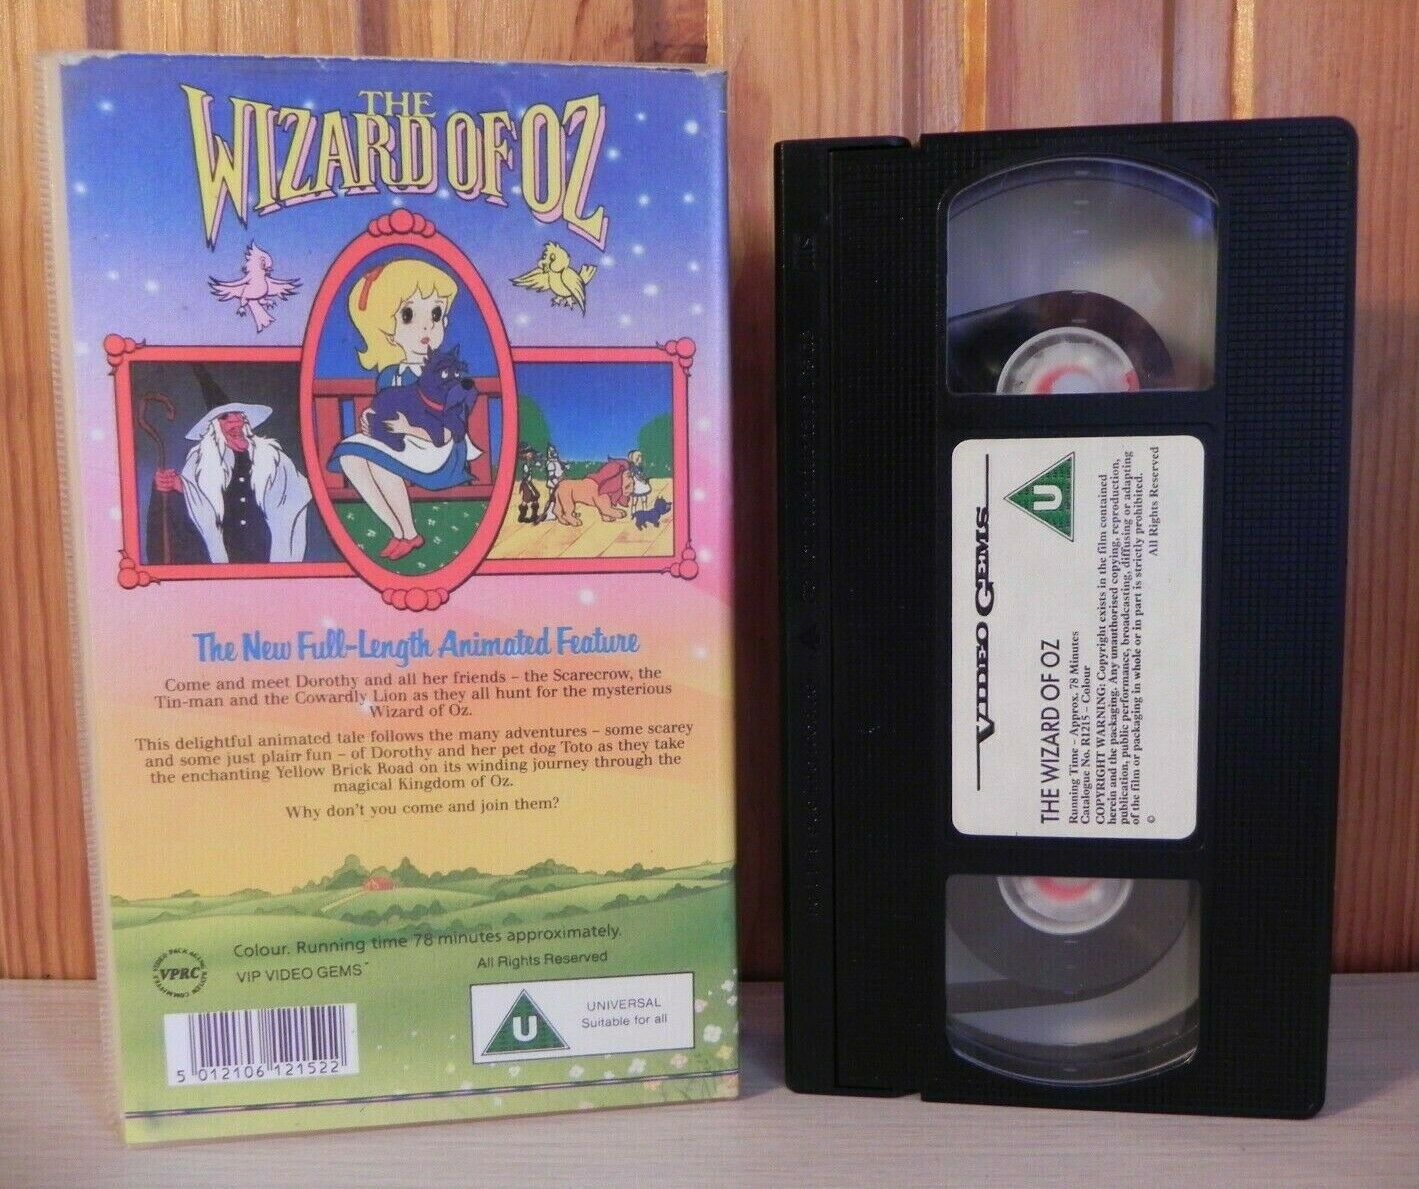 The Wizard Of Oz: Based On L. Frank Baum Book - Animated - Children's - Pal VHS-